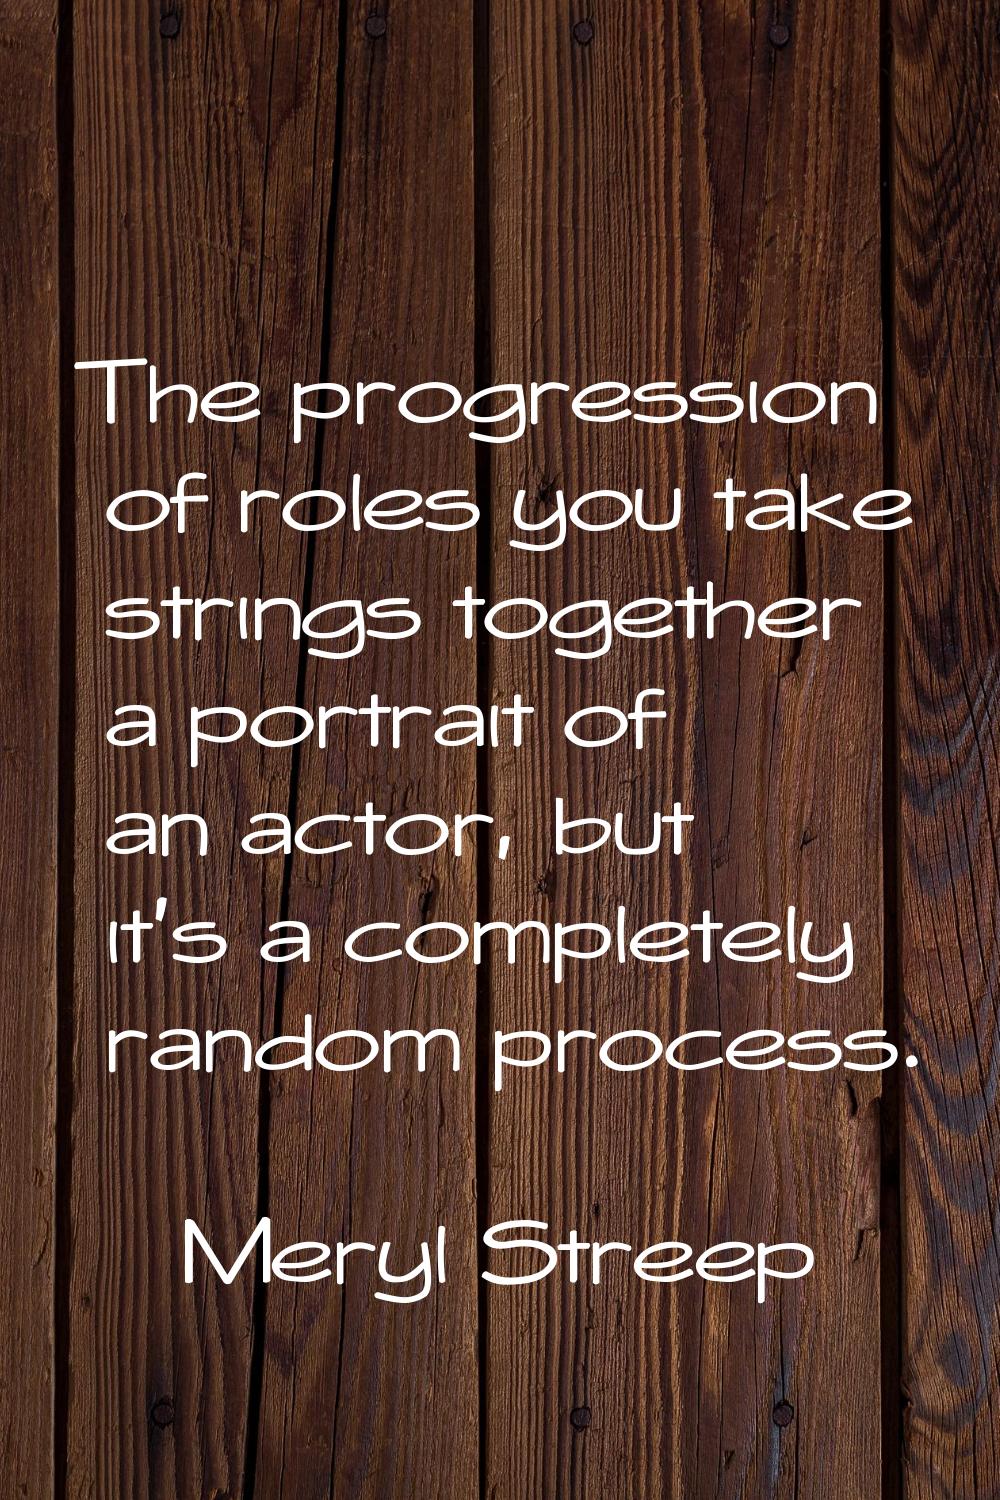 The progression of roles you take strings together a portrait of an actor, but it's a completely ra